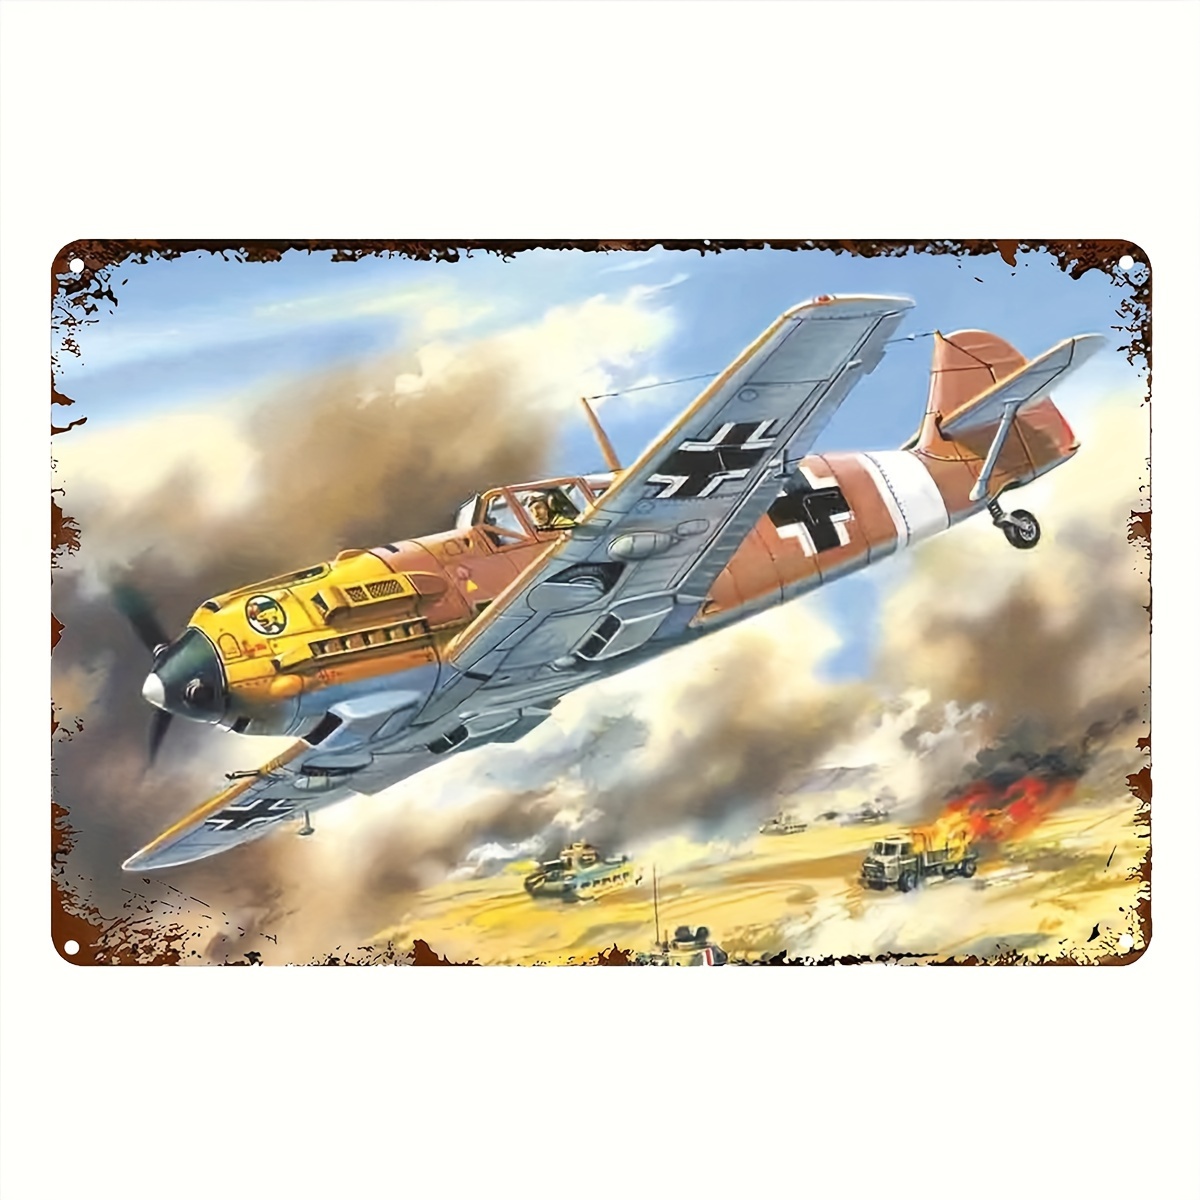 

Vintage Wwii Fighter Plane Metal Tin Sign - Retro Airplane Wall Art For Home, Bar, Man Cave Decor - Durable Iron Construction, 12x8 Inch